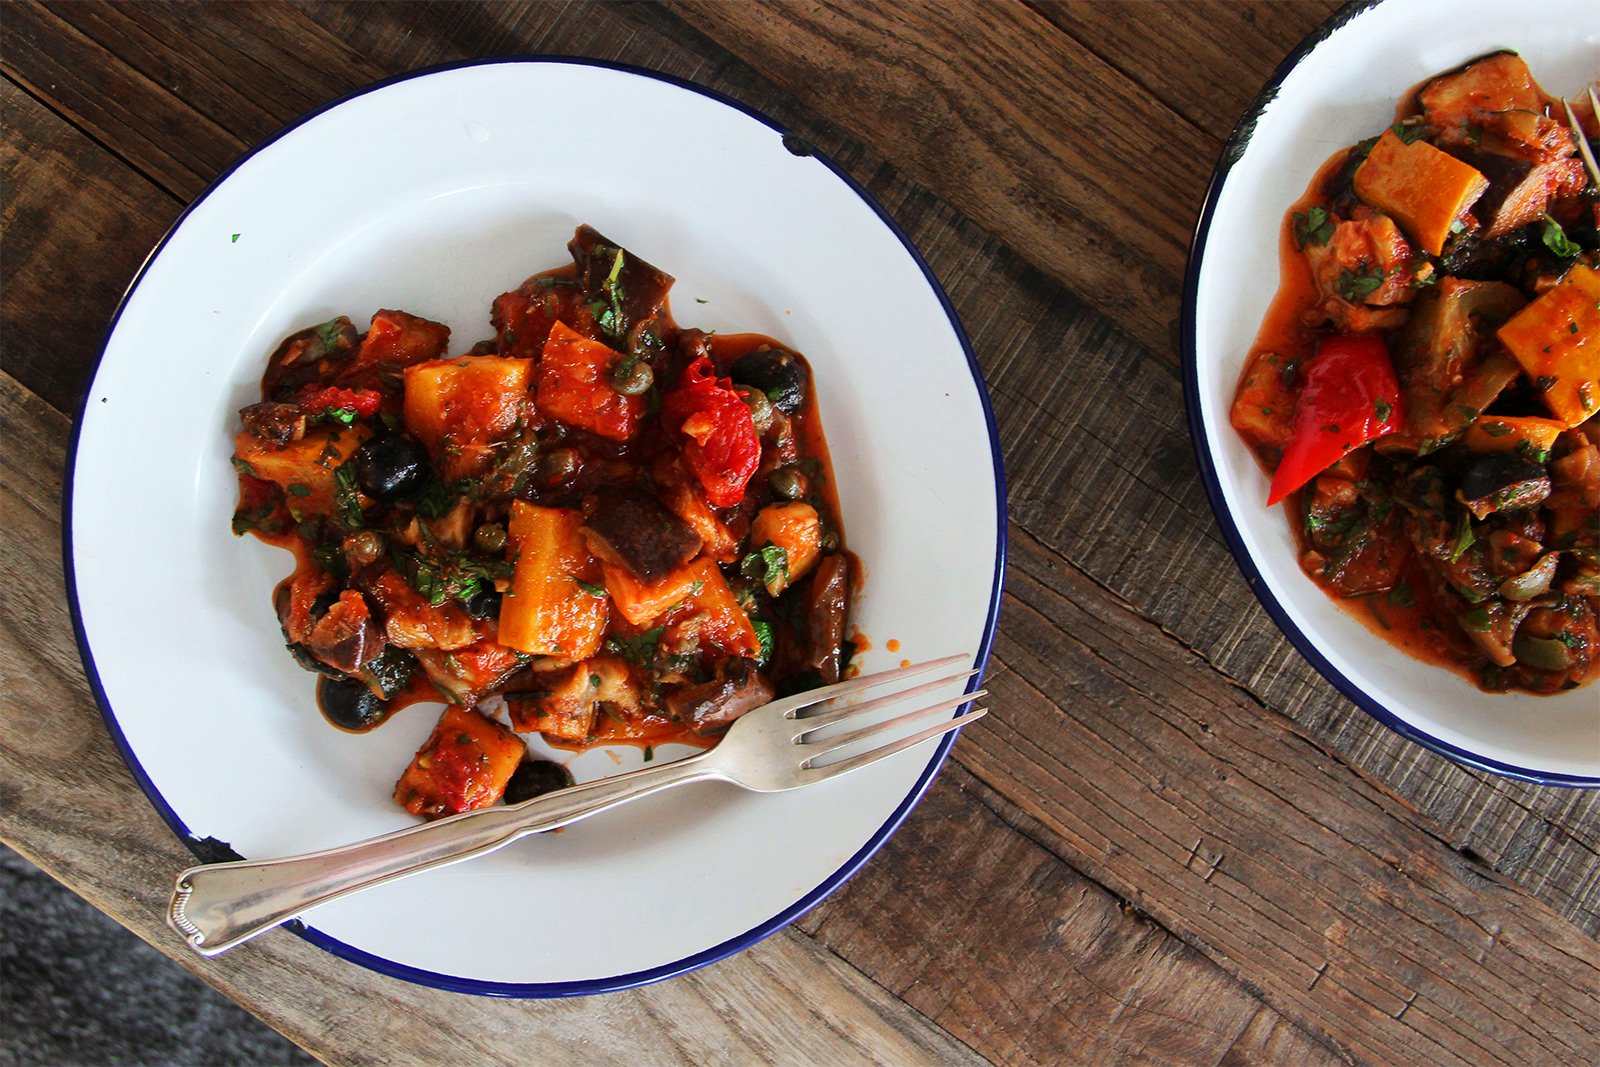 How to try caponata in Sicily